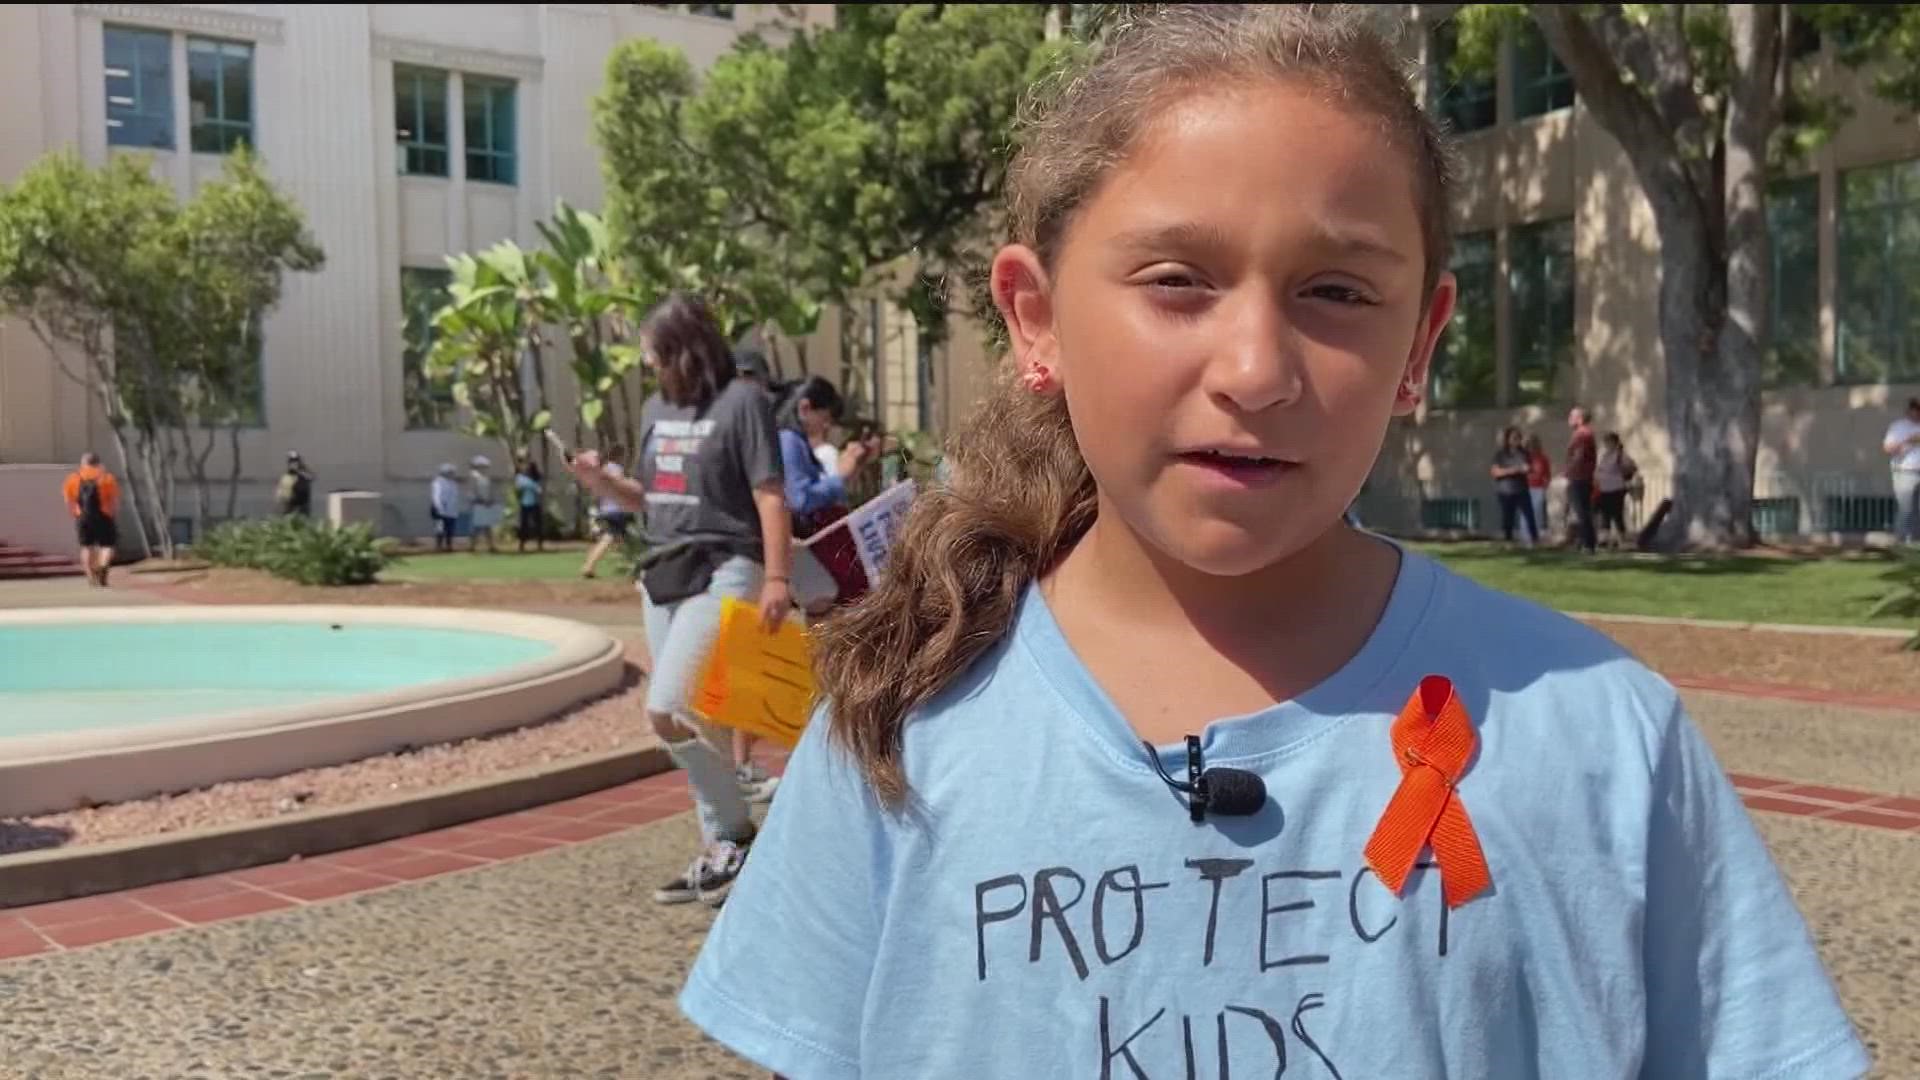 Protesters are demanding for gun reform and more safety measures at schools.